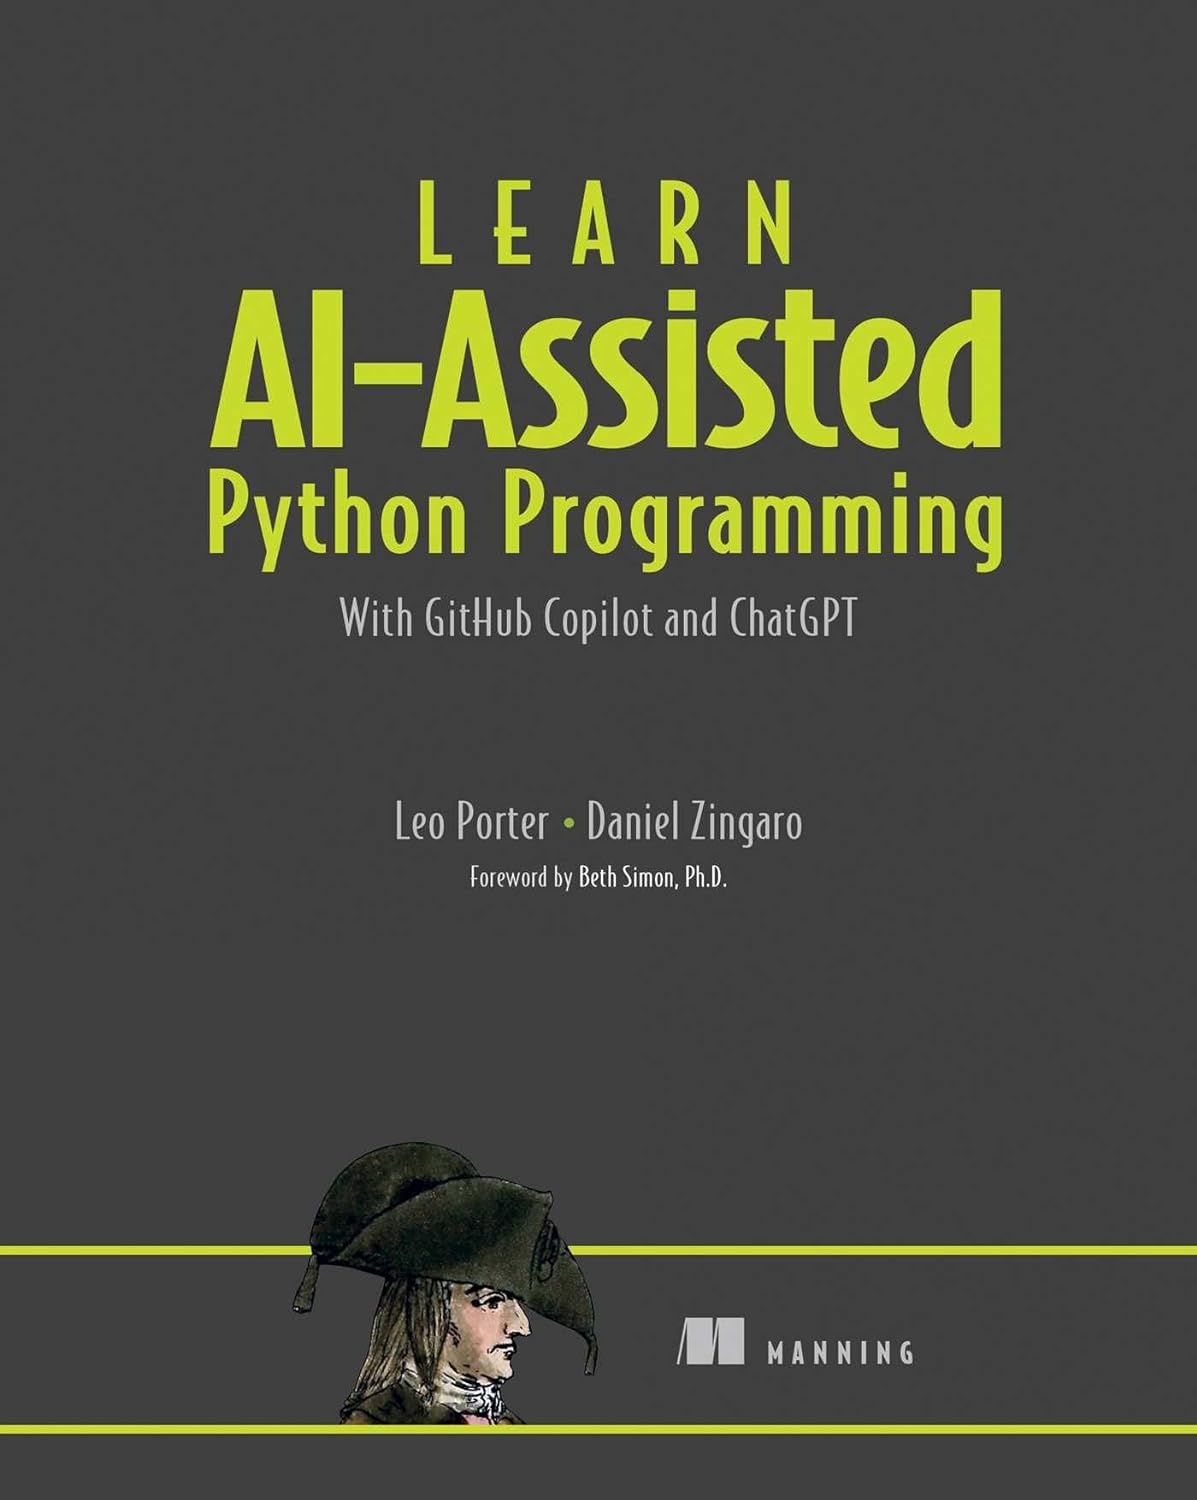 Book cover for "Learn AI-Assisted Python Programming: With GitHub Copilot and ChatGPT" by Leo Porter and Daniel Zingaro. Manning Press. 2023.